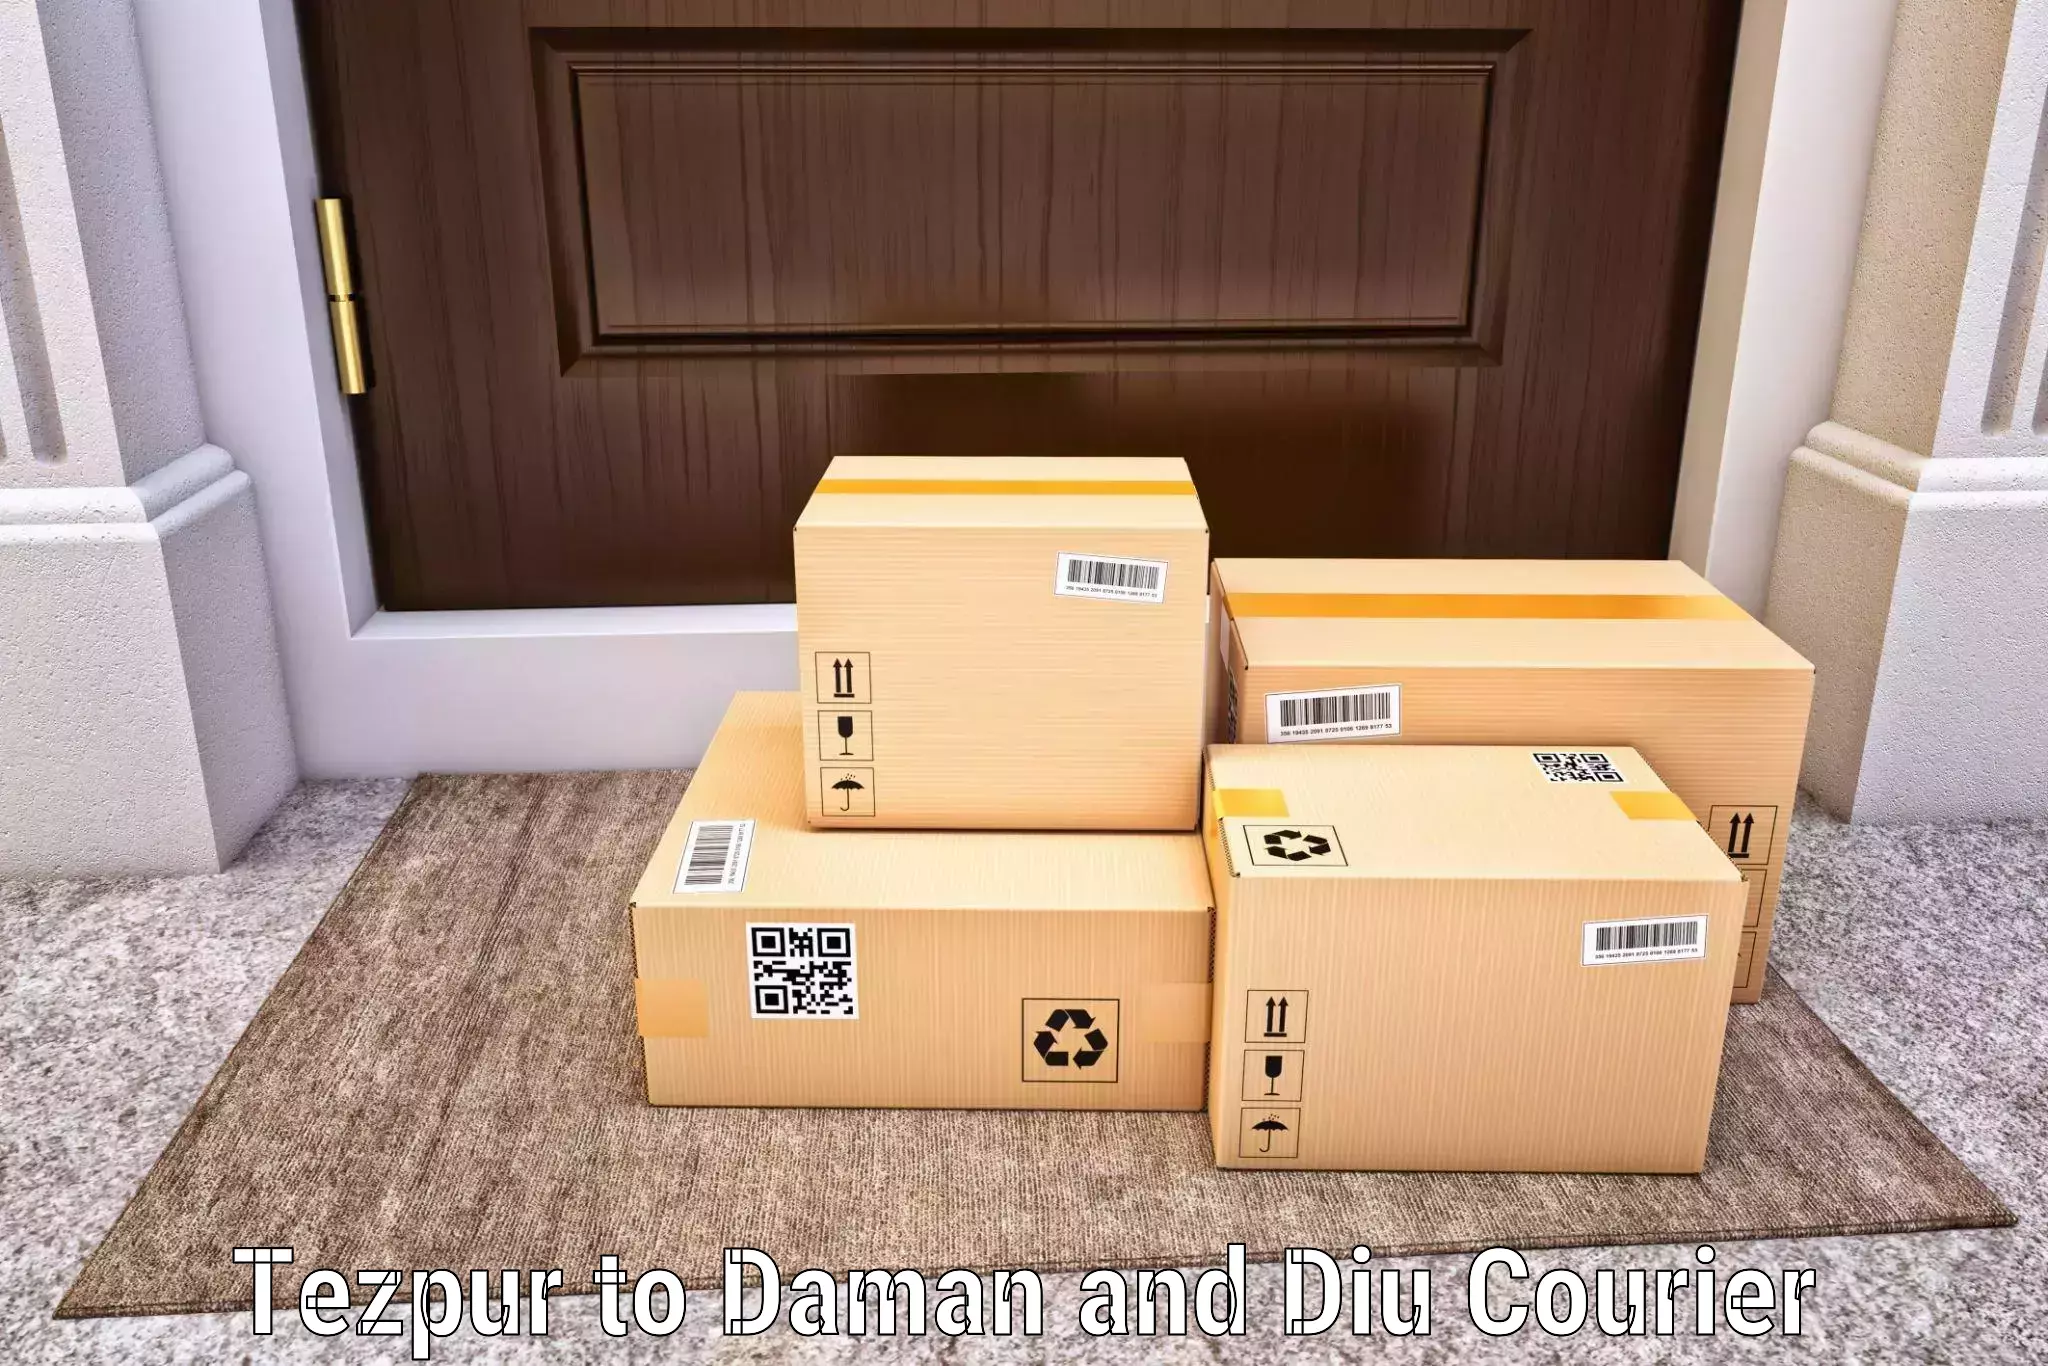 State-of-the-art courier technology Tezpur to Daman and Diu